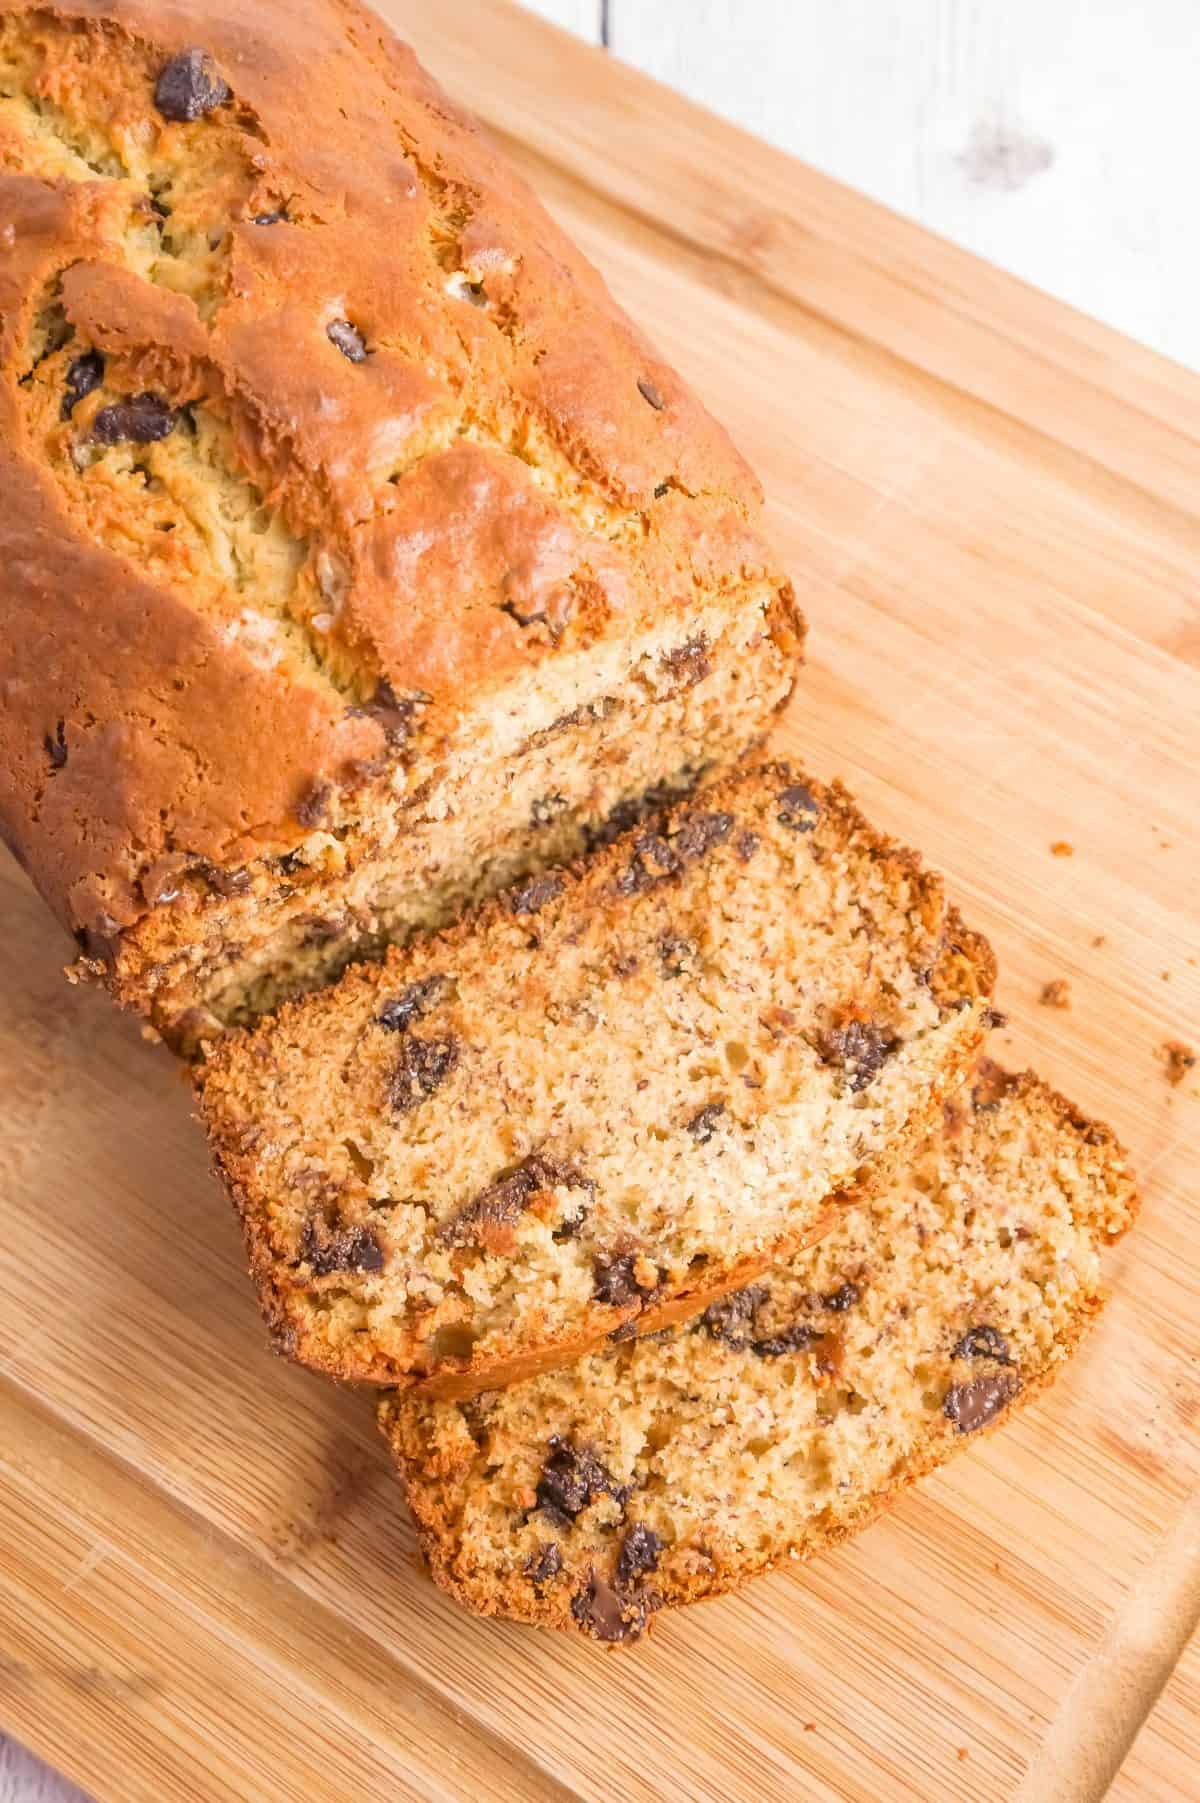 Chocolate Chip Banana Bread is a tasty treat made with ripe bananas and loaded with semi-sweet chocolate chips.